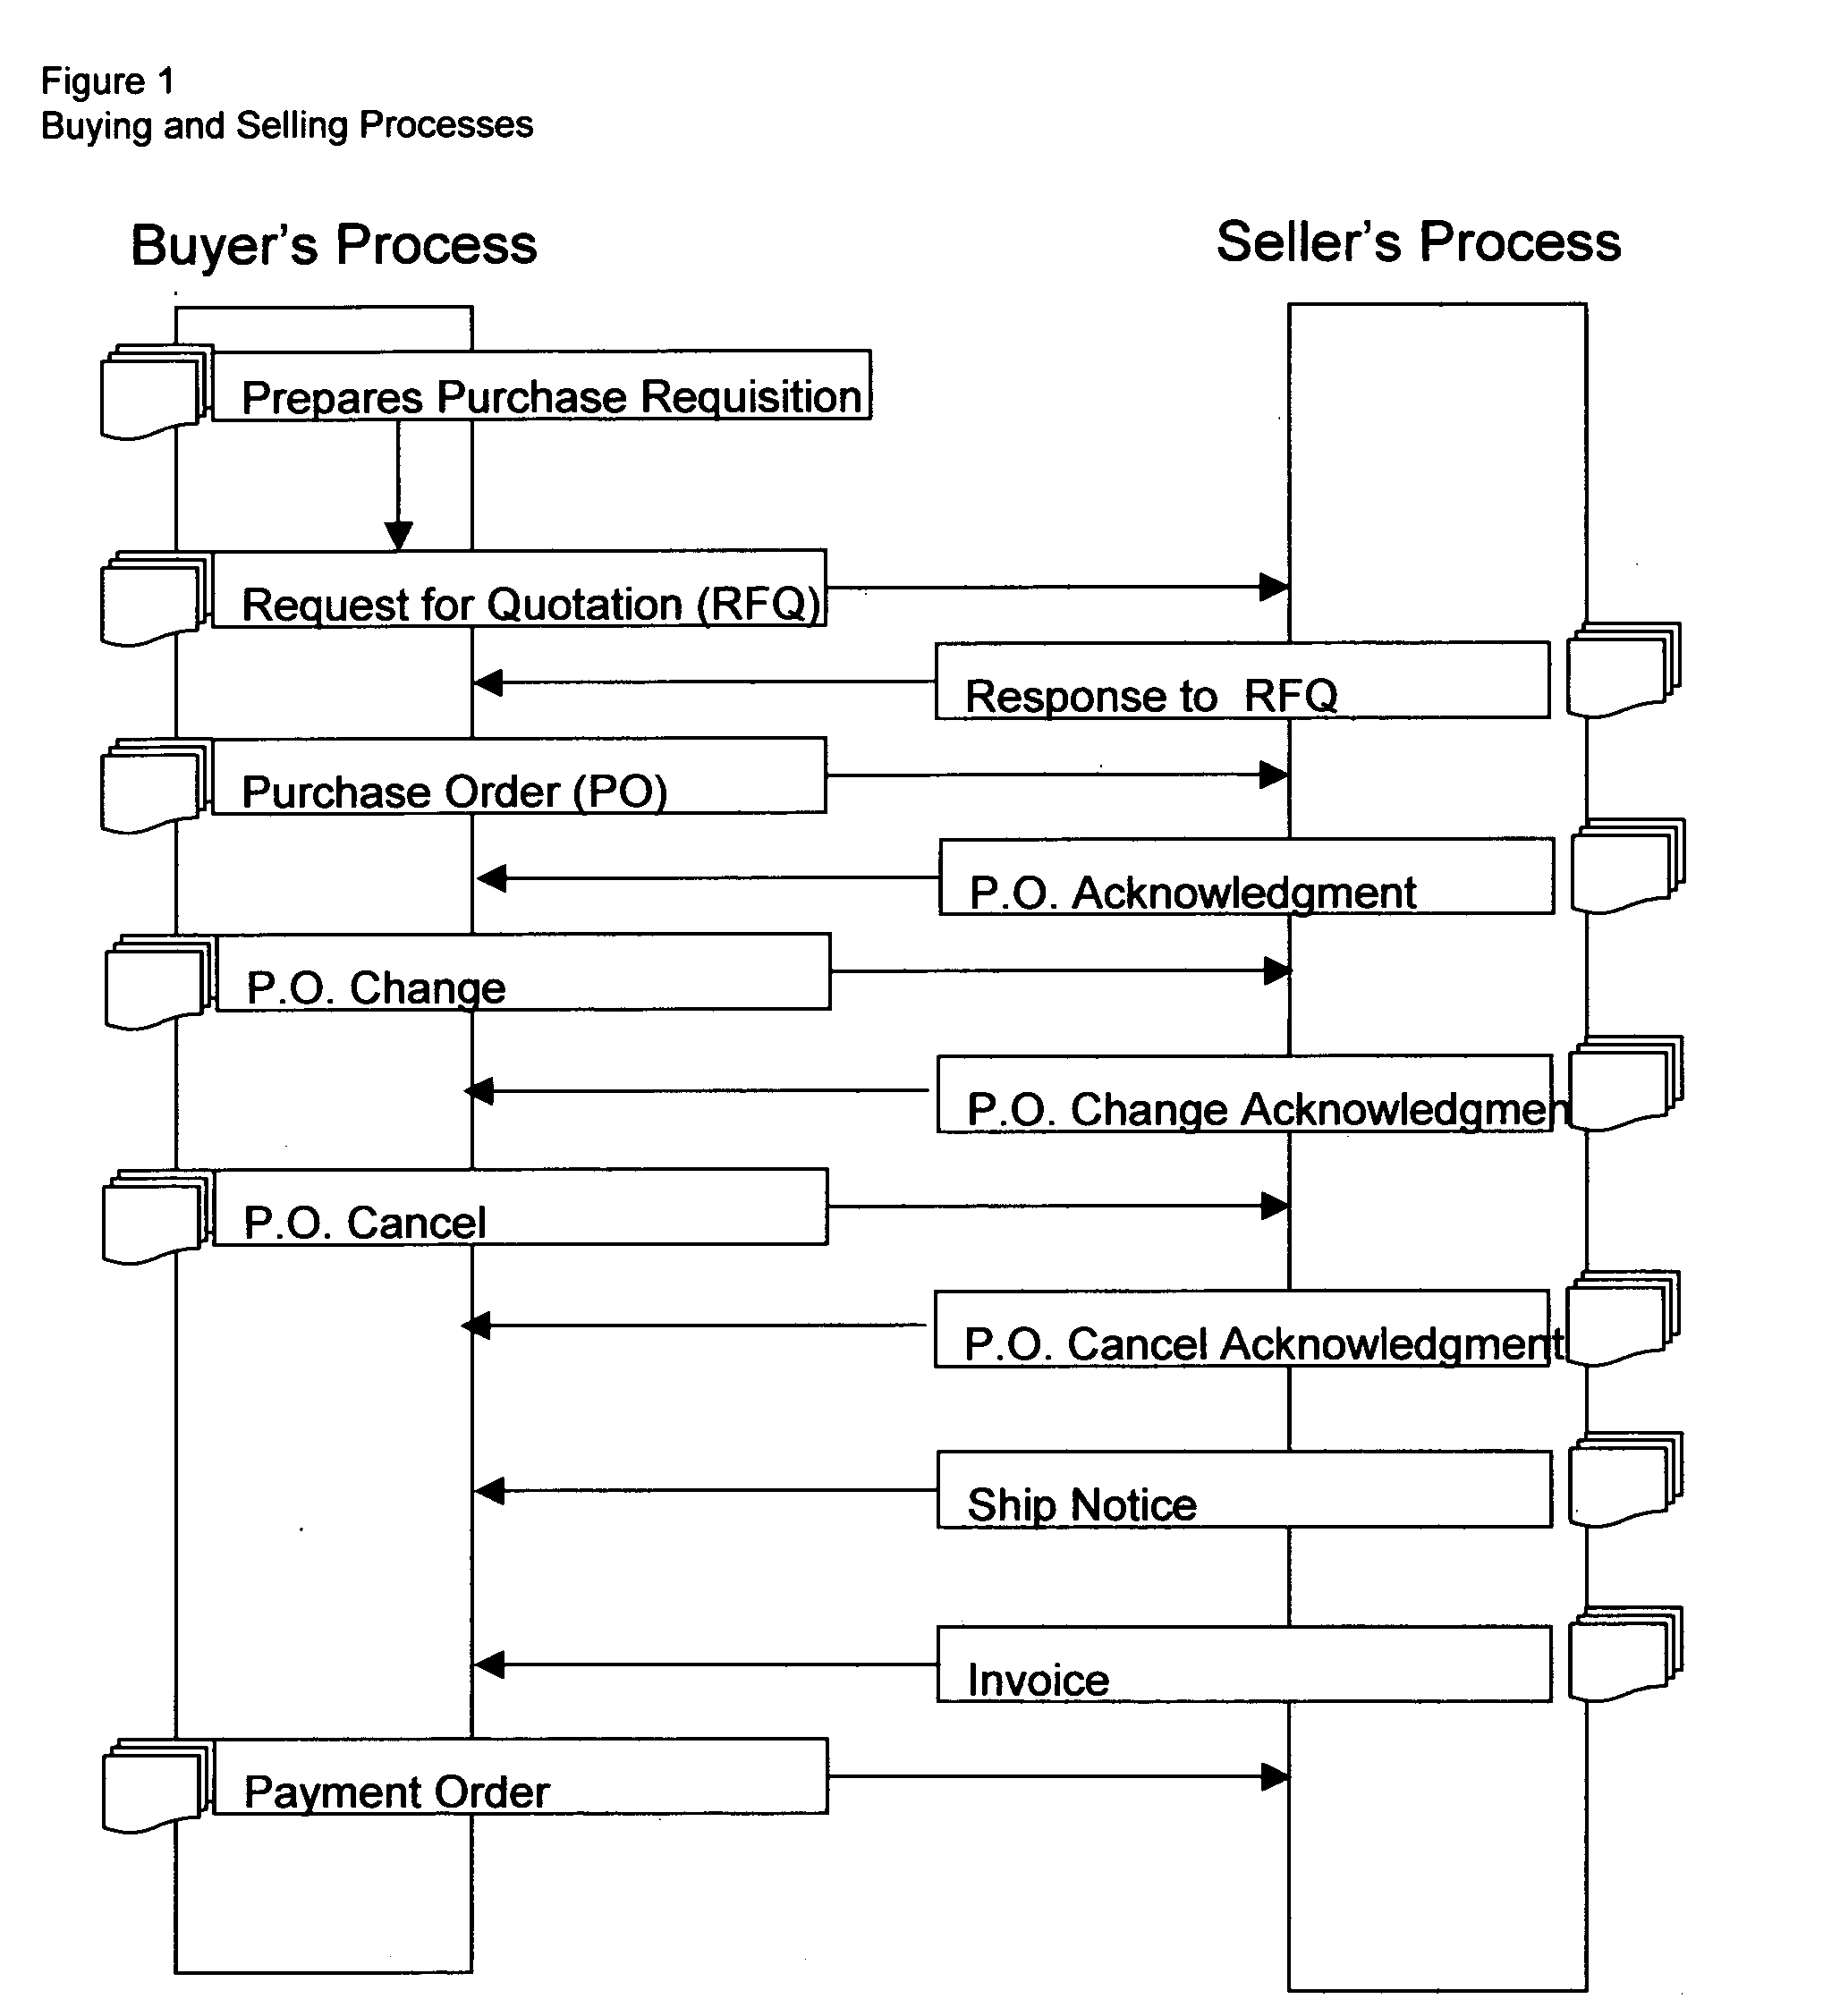 System and method for business-to-business buying, selling, sourcing and matching of proudcts and services across multiple business partners over the internet